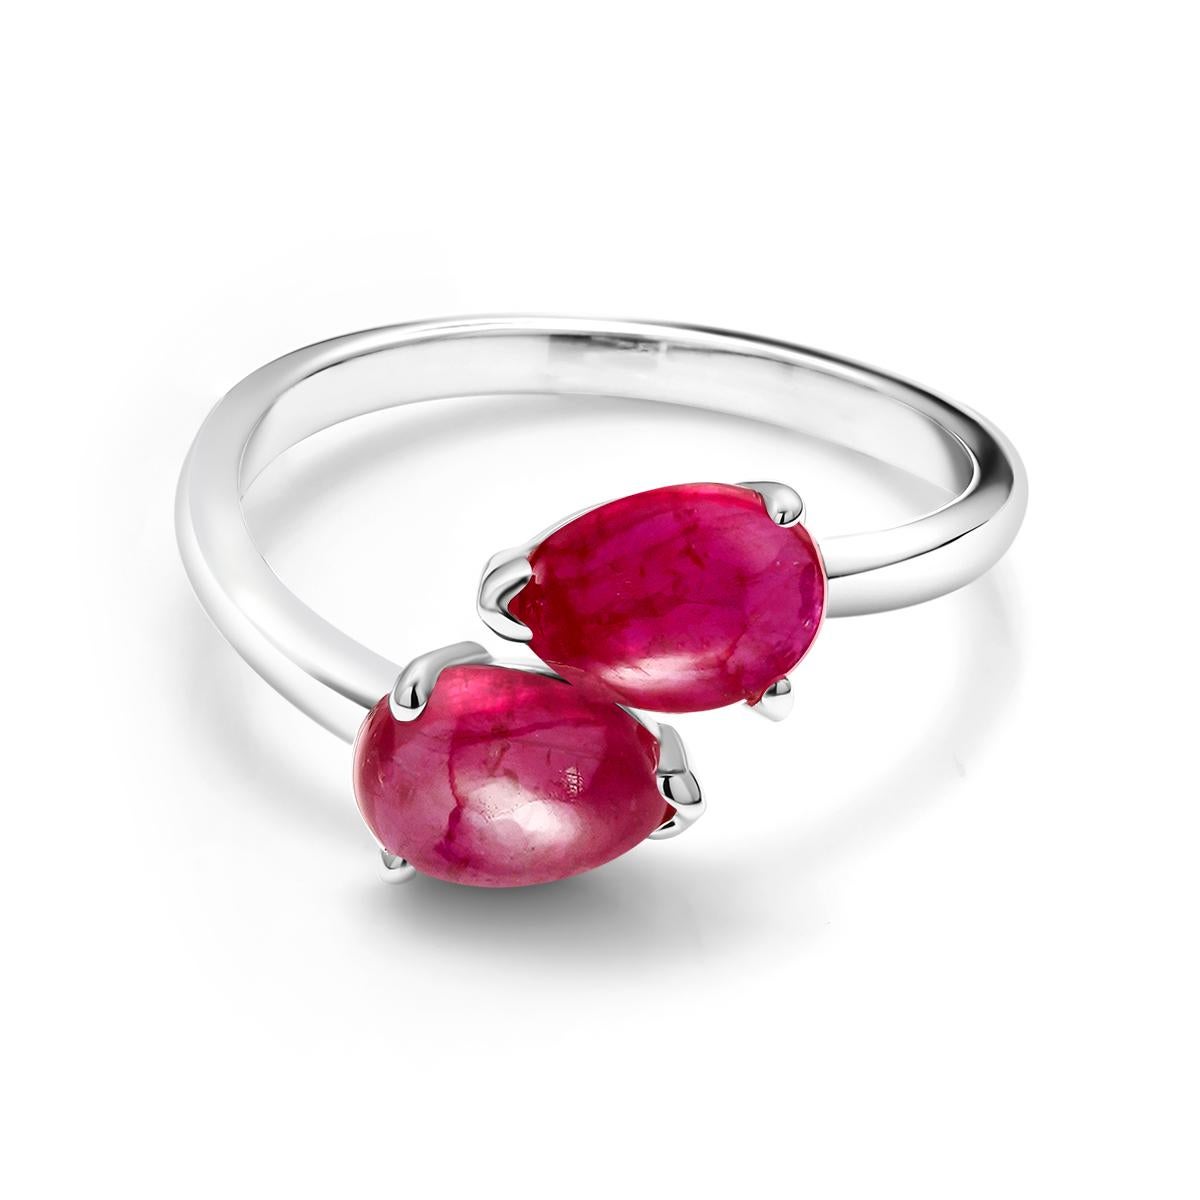 Women's Two Facing Cabochon Pear Shape Burma Rubies Gold Cocktail Ring